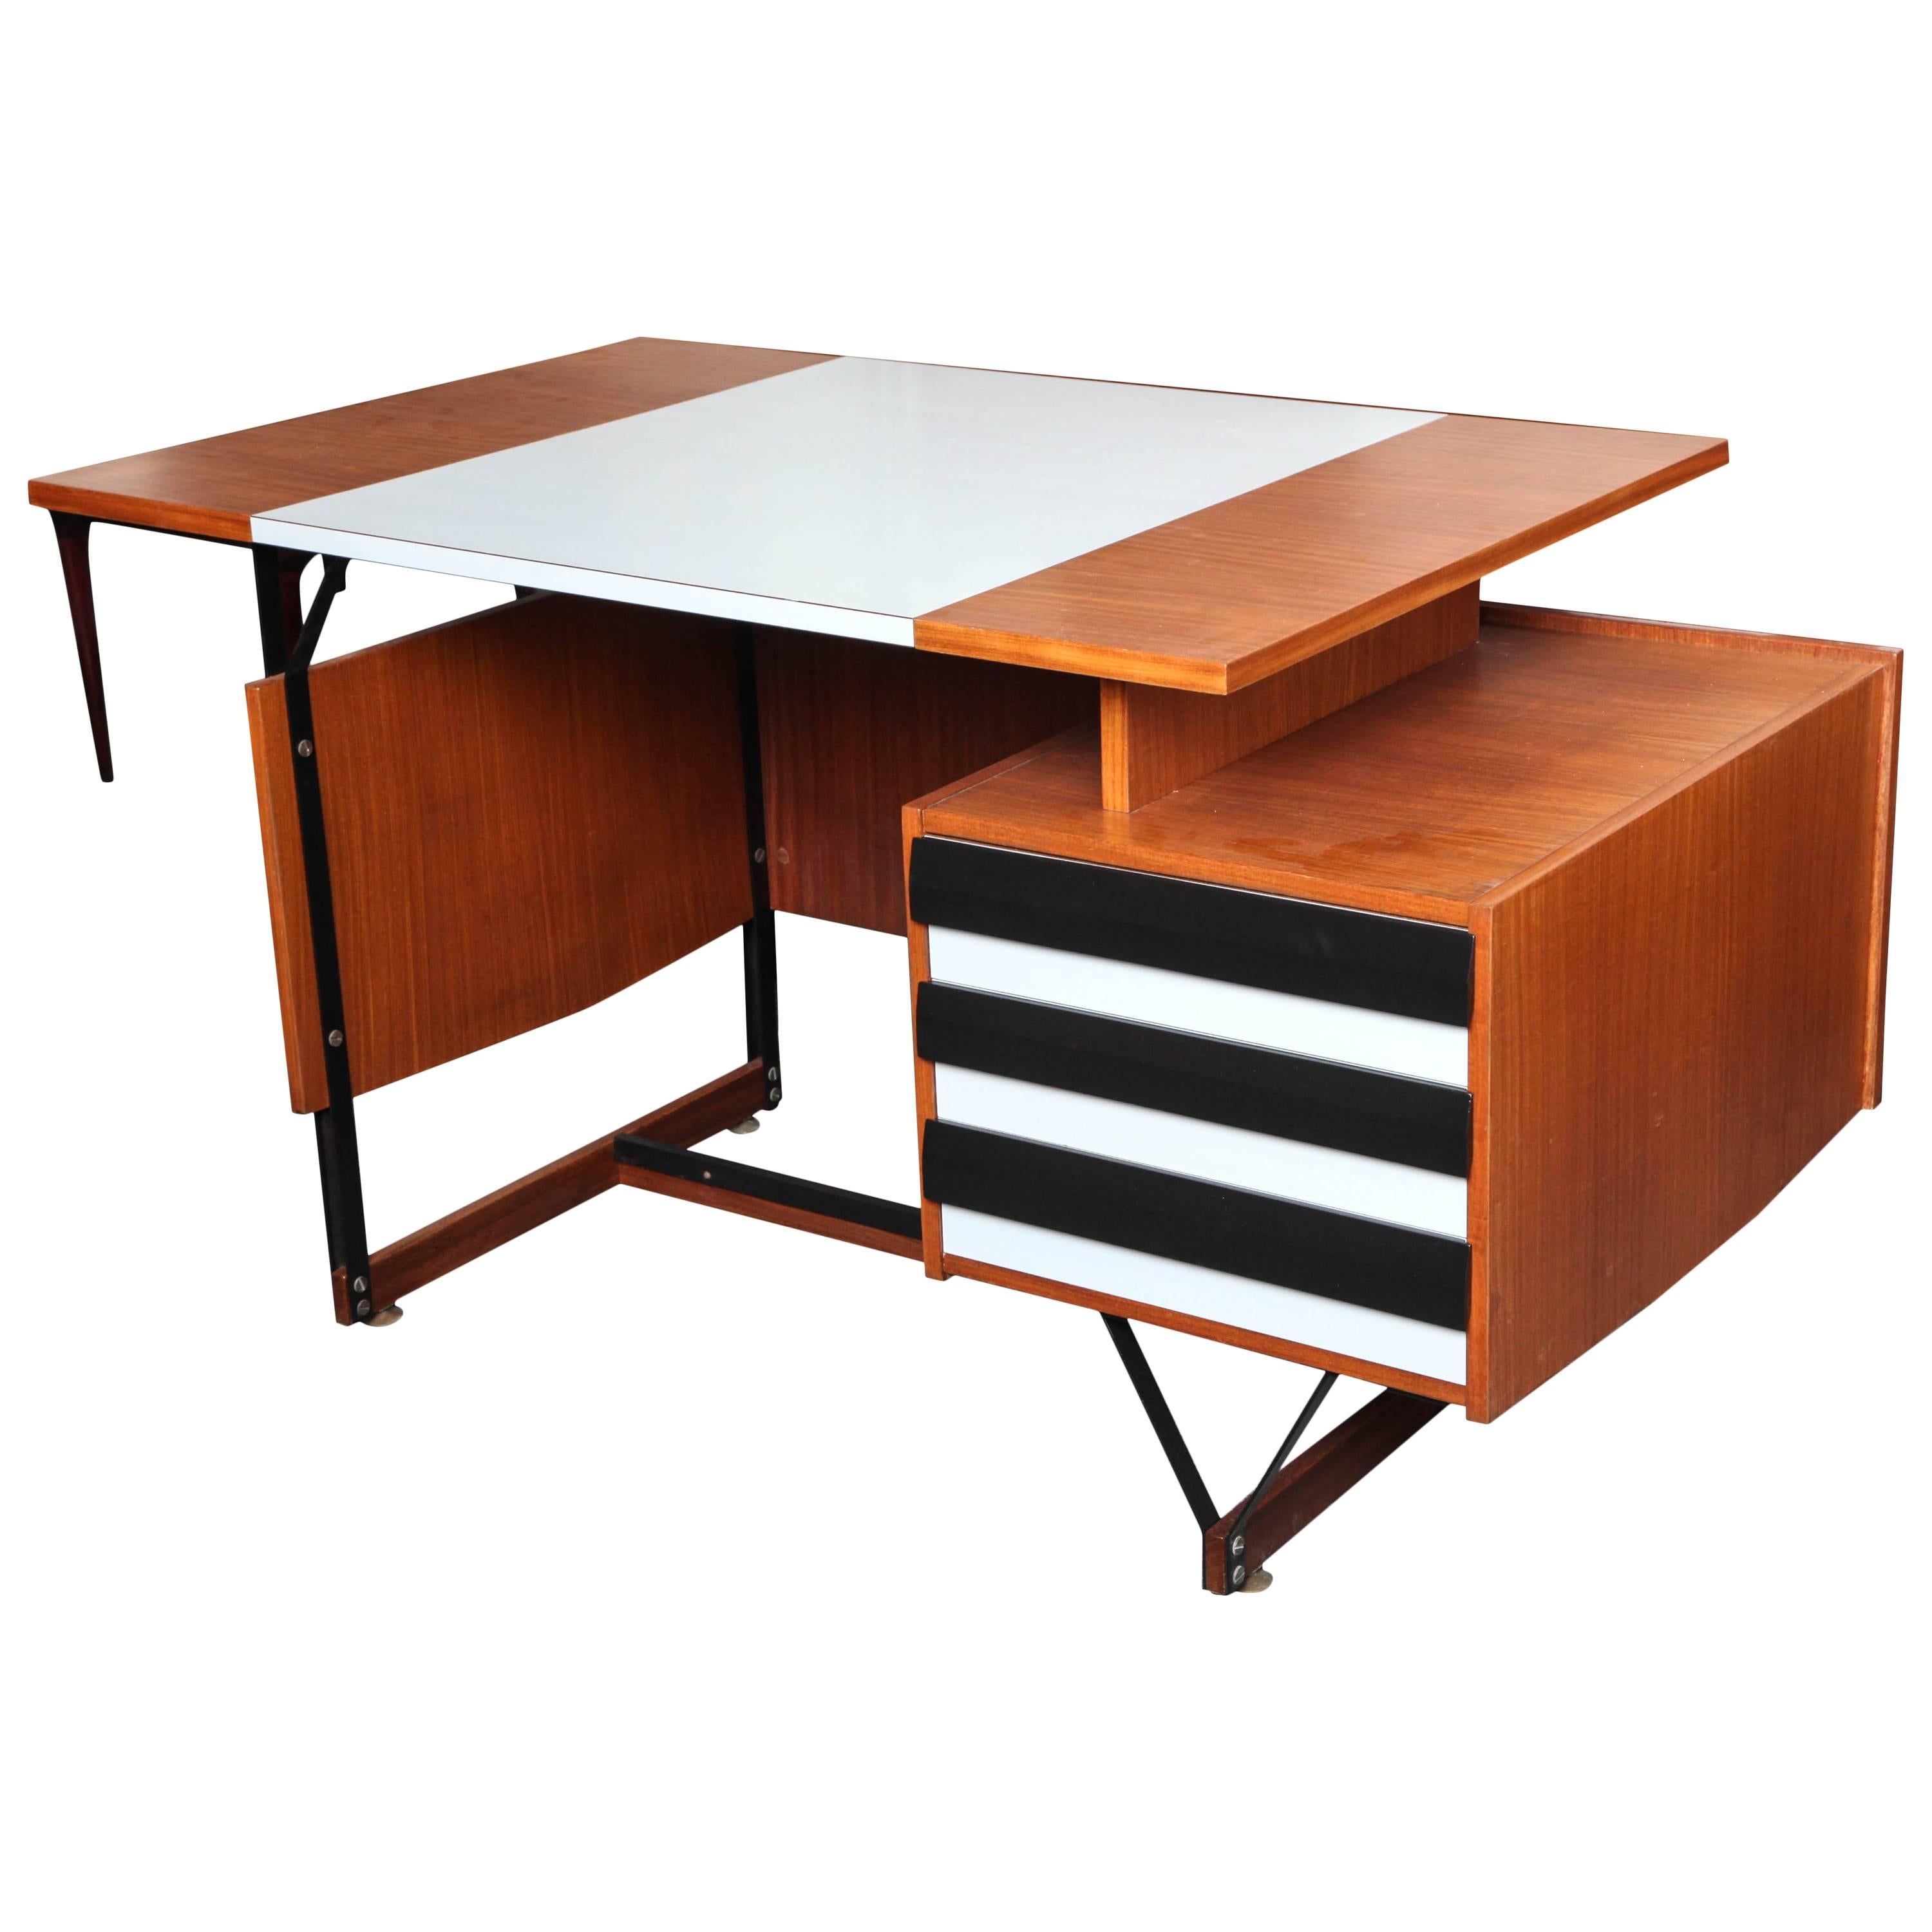 Modernist Desk Made in Italy in 1955 For Sale